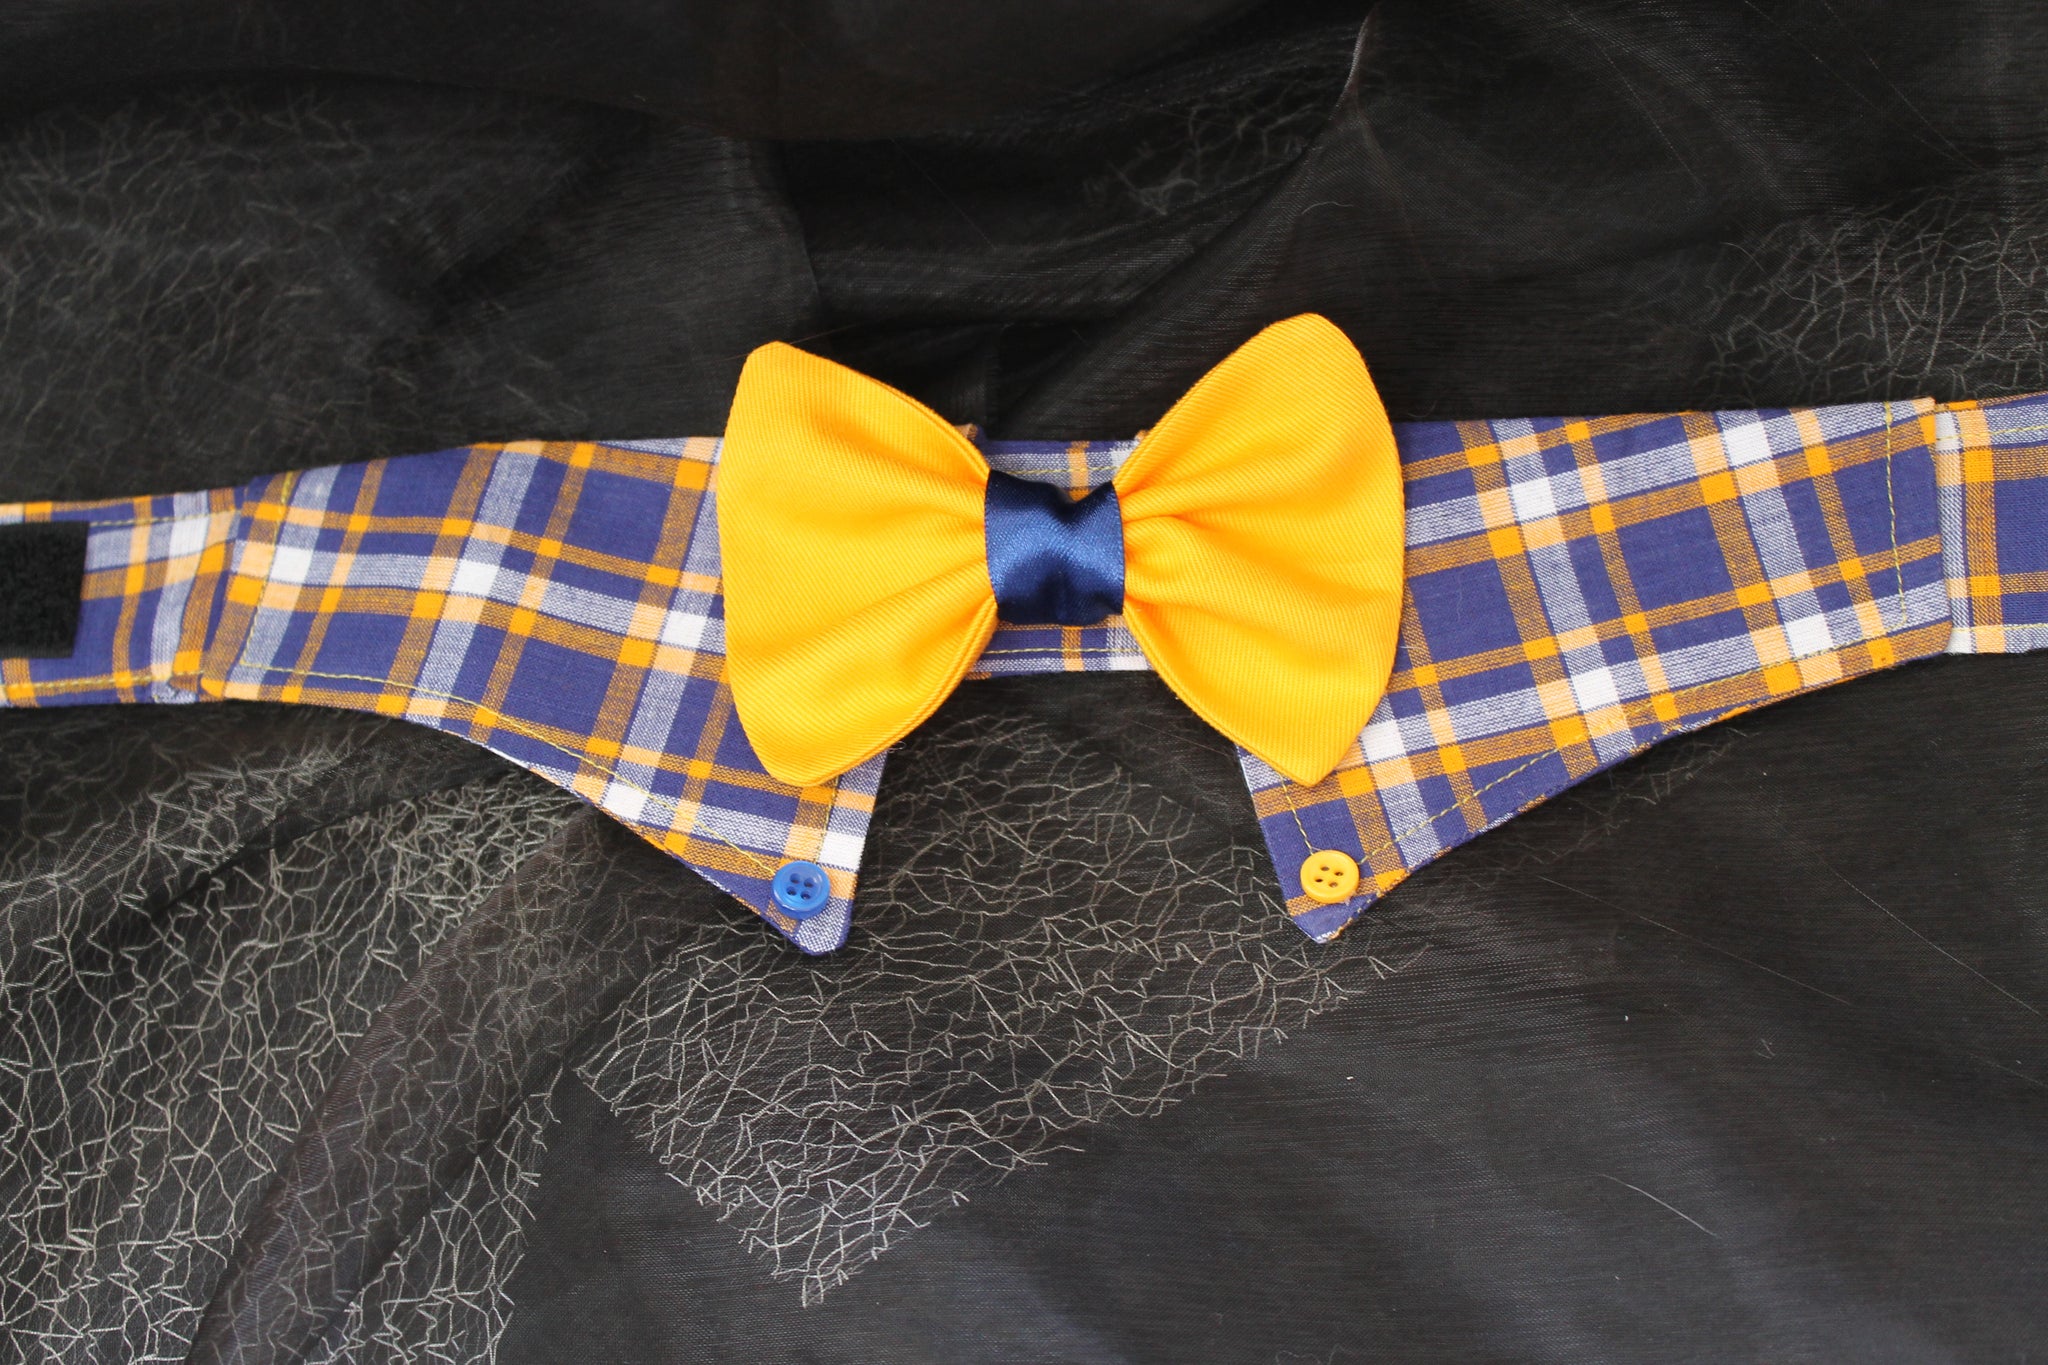 Clueless - Shirt Collar and Bow Tie